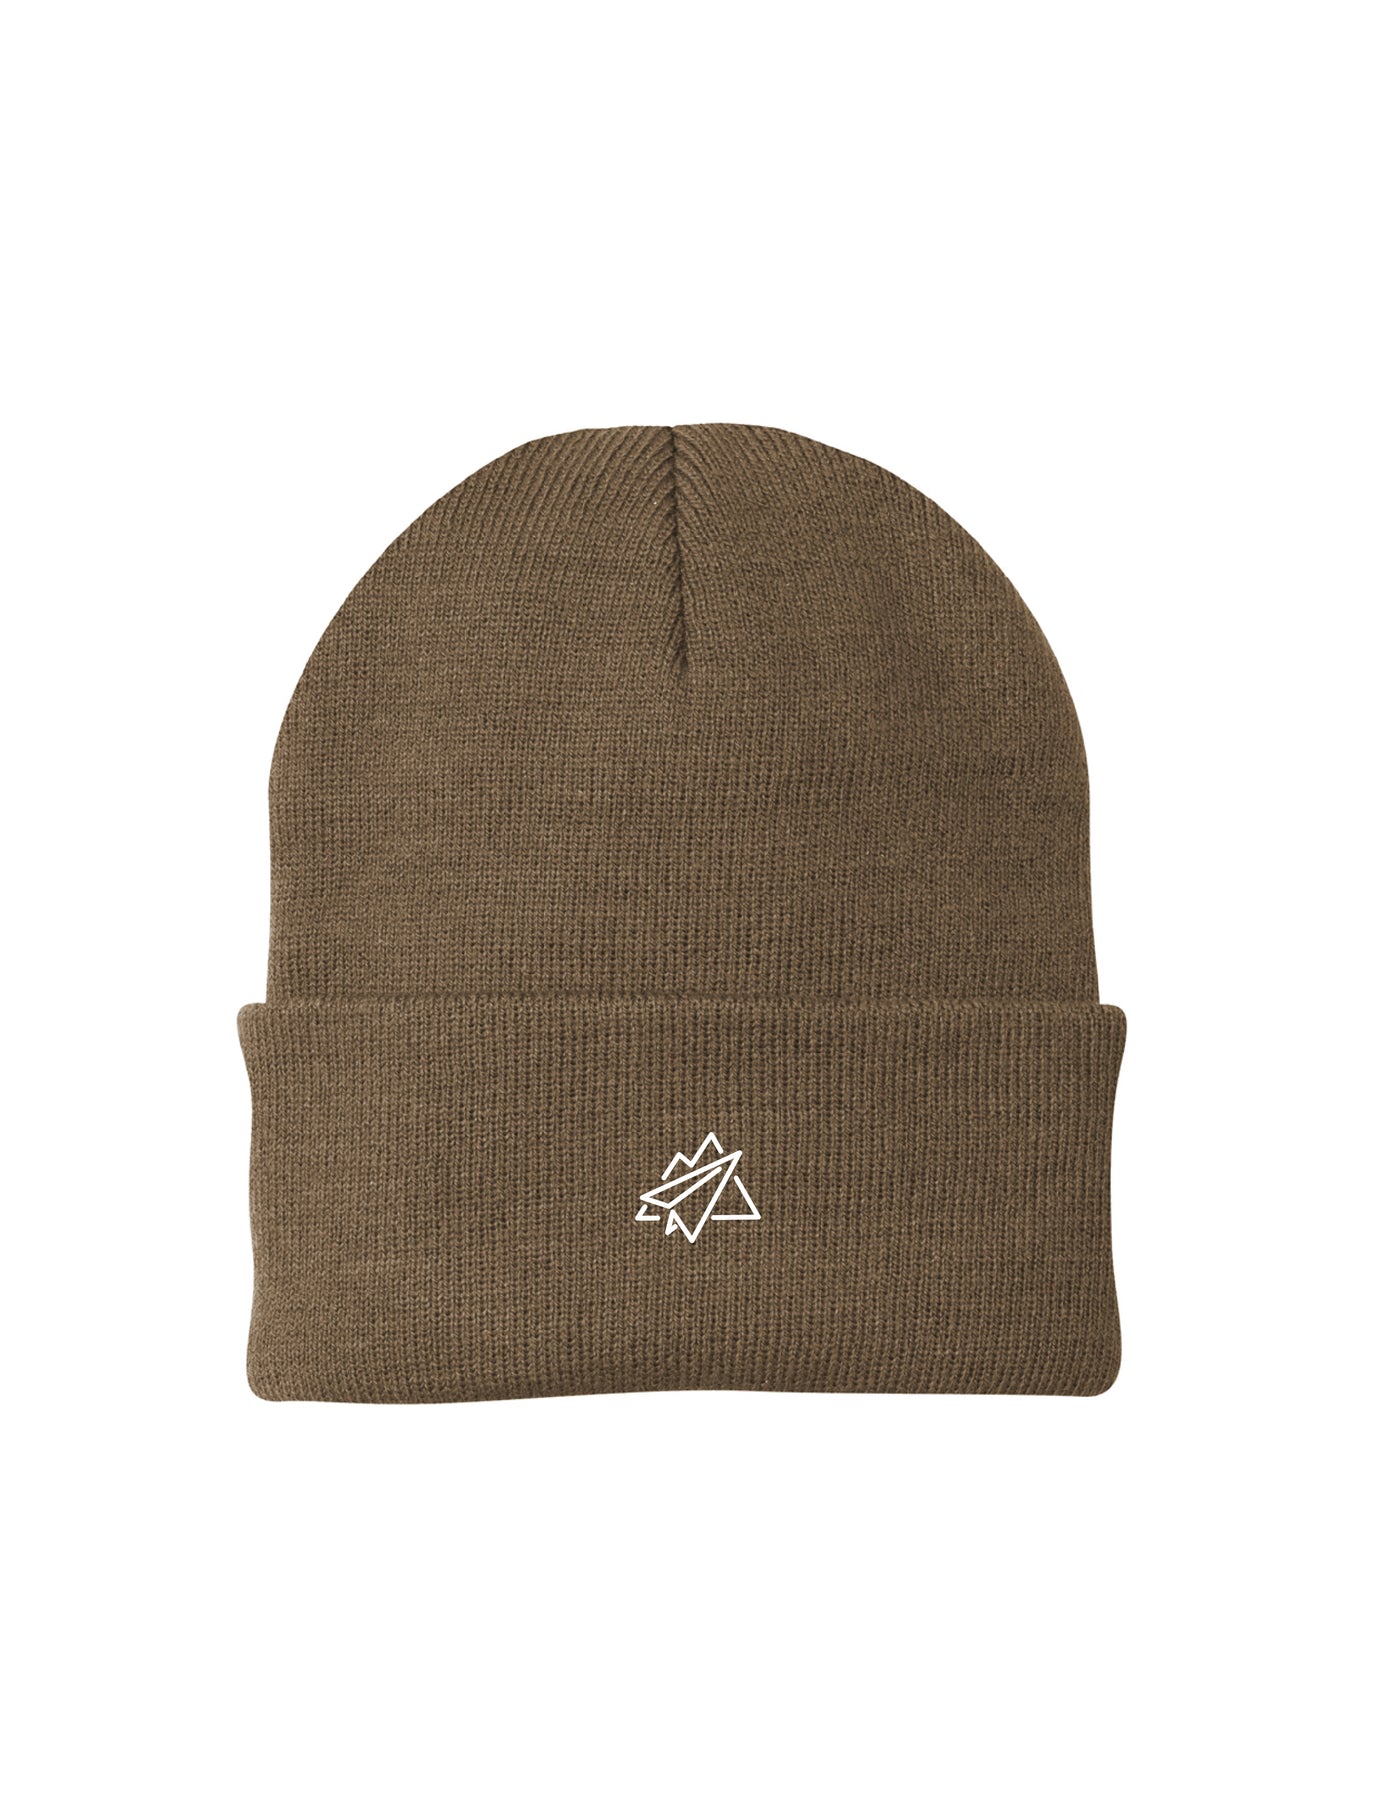 The Nomad Beanie - Brown